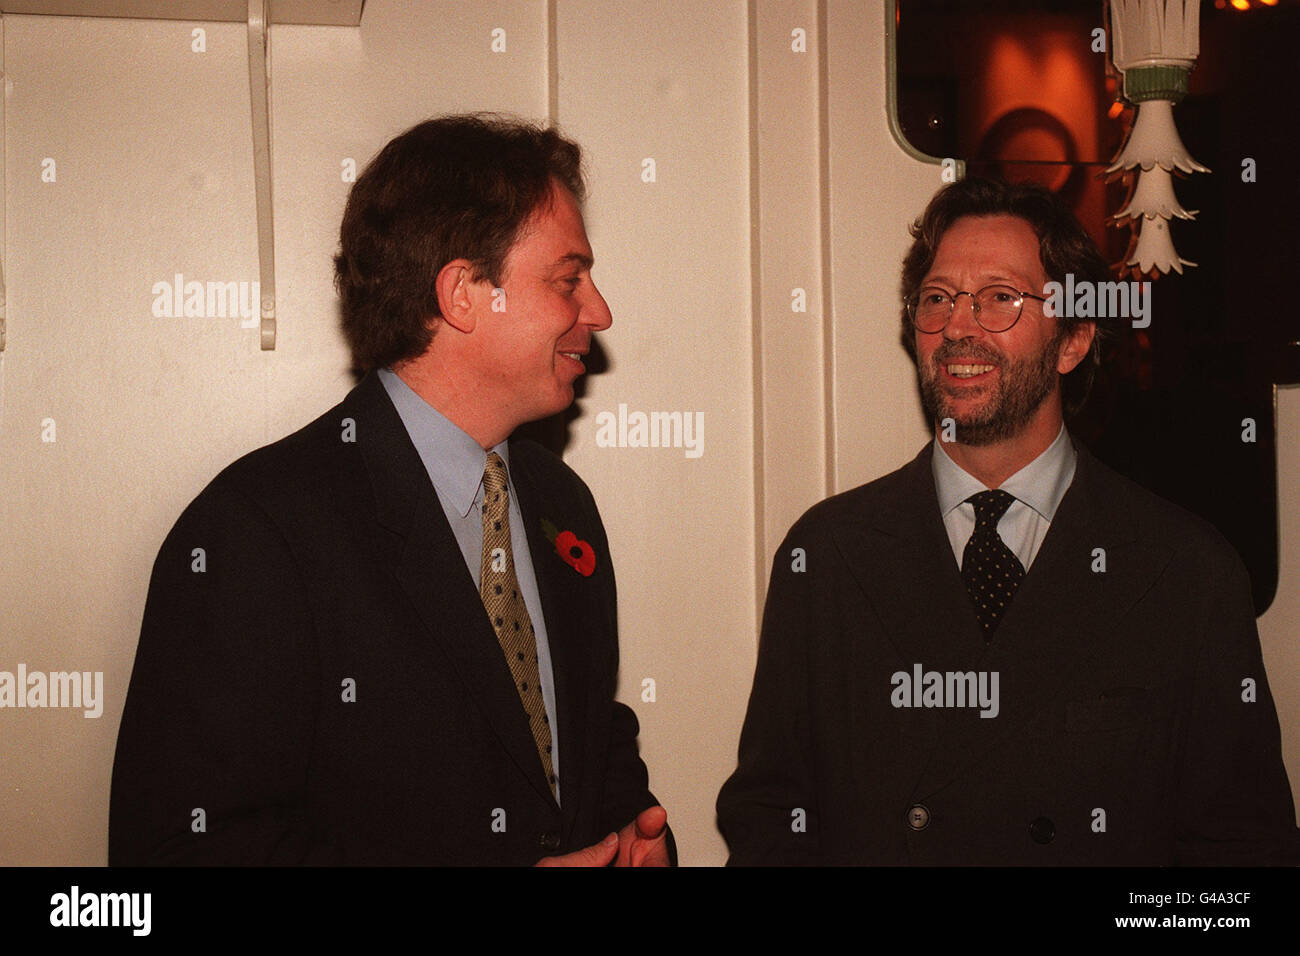 ROCK LEGEND ERIC CLAPTON AND LABOUR LEADER TONY BLAIR AT THE 1995 Q MUSIC AWARDS IN LONDON. Stock Photo